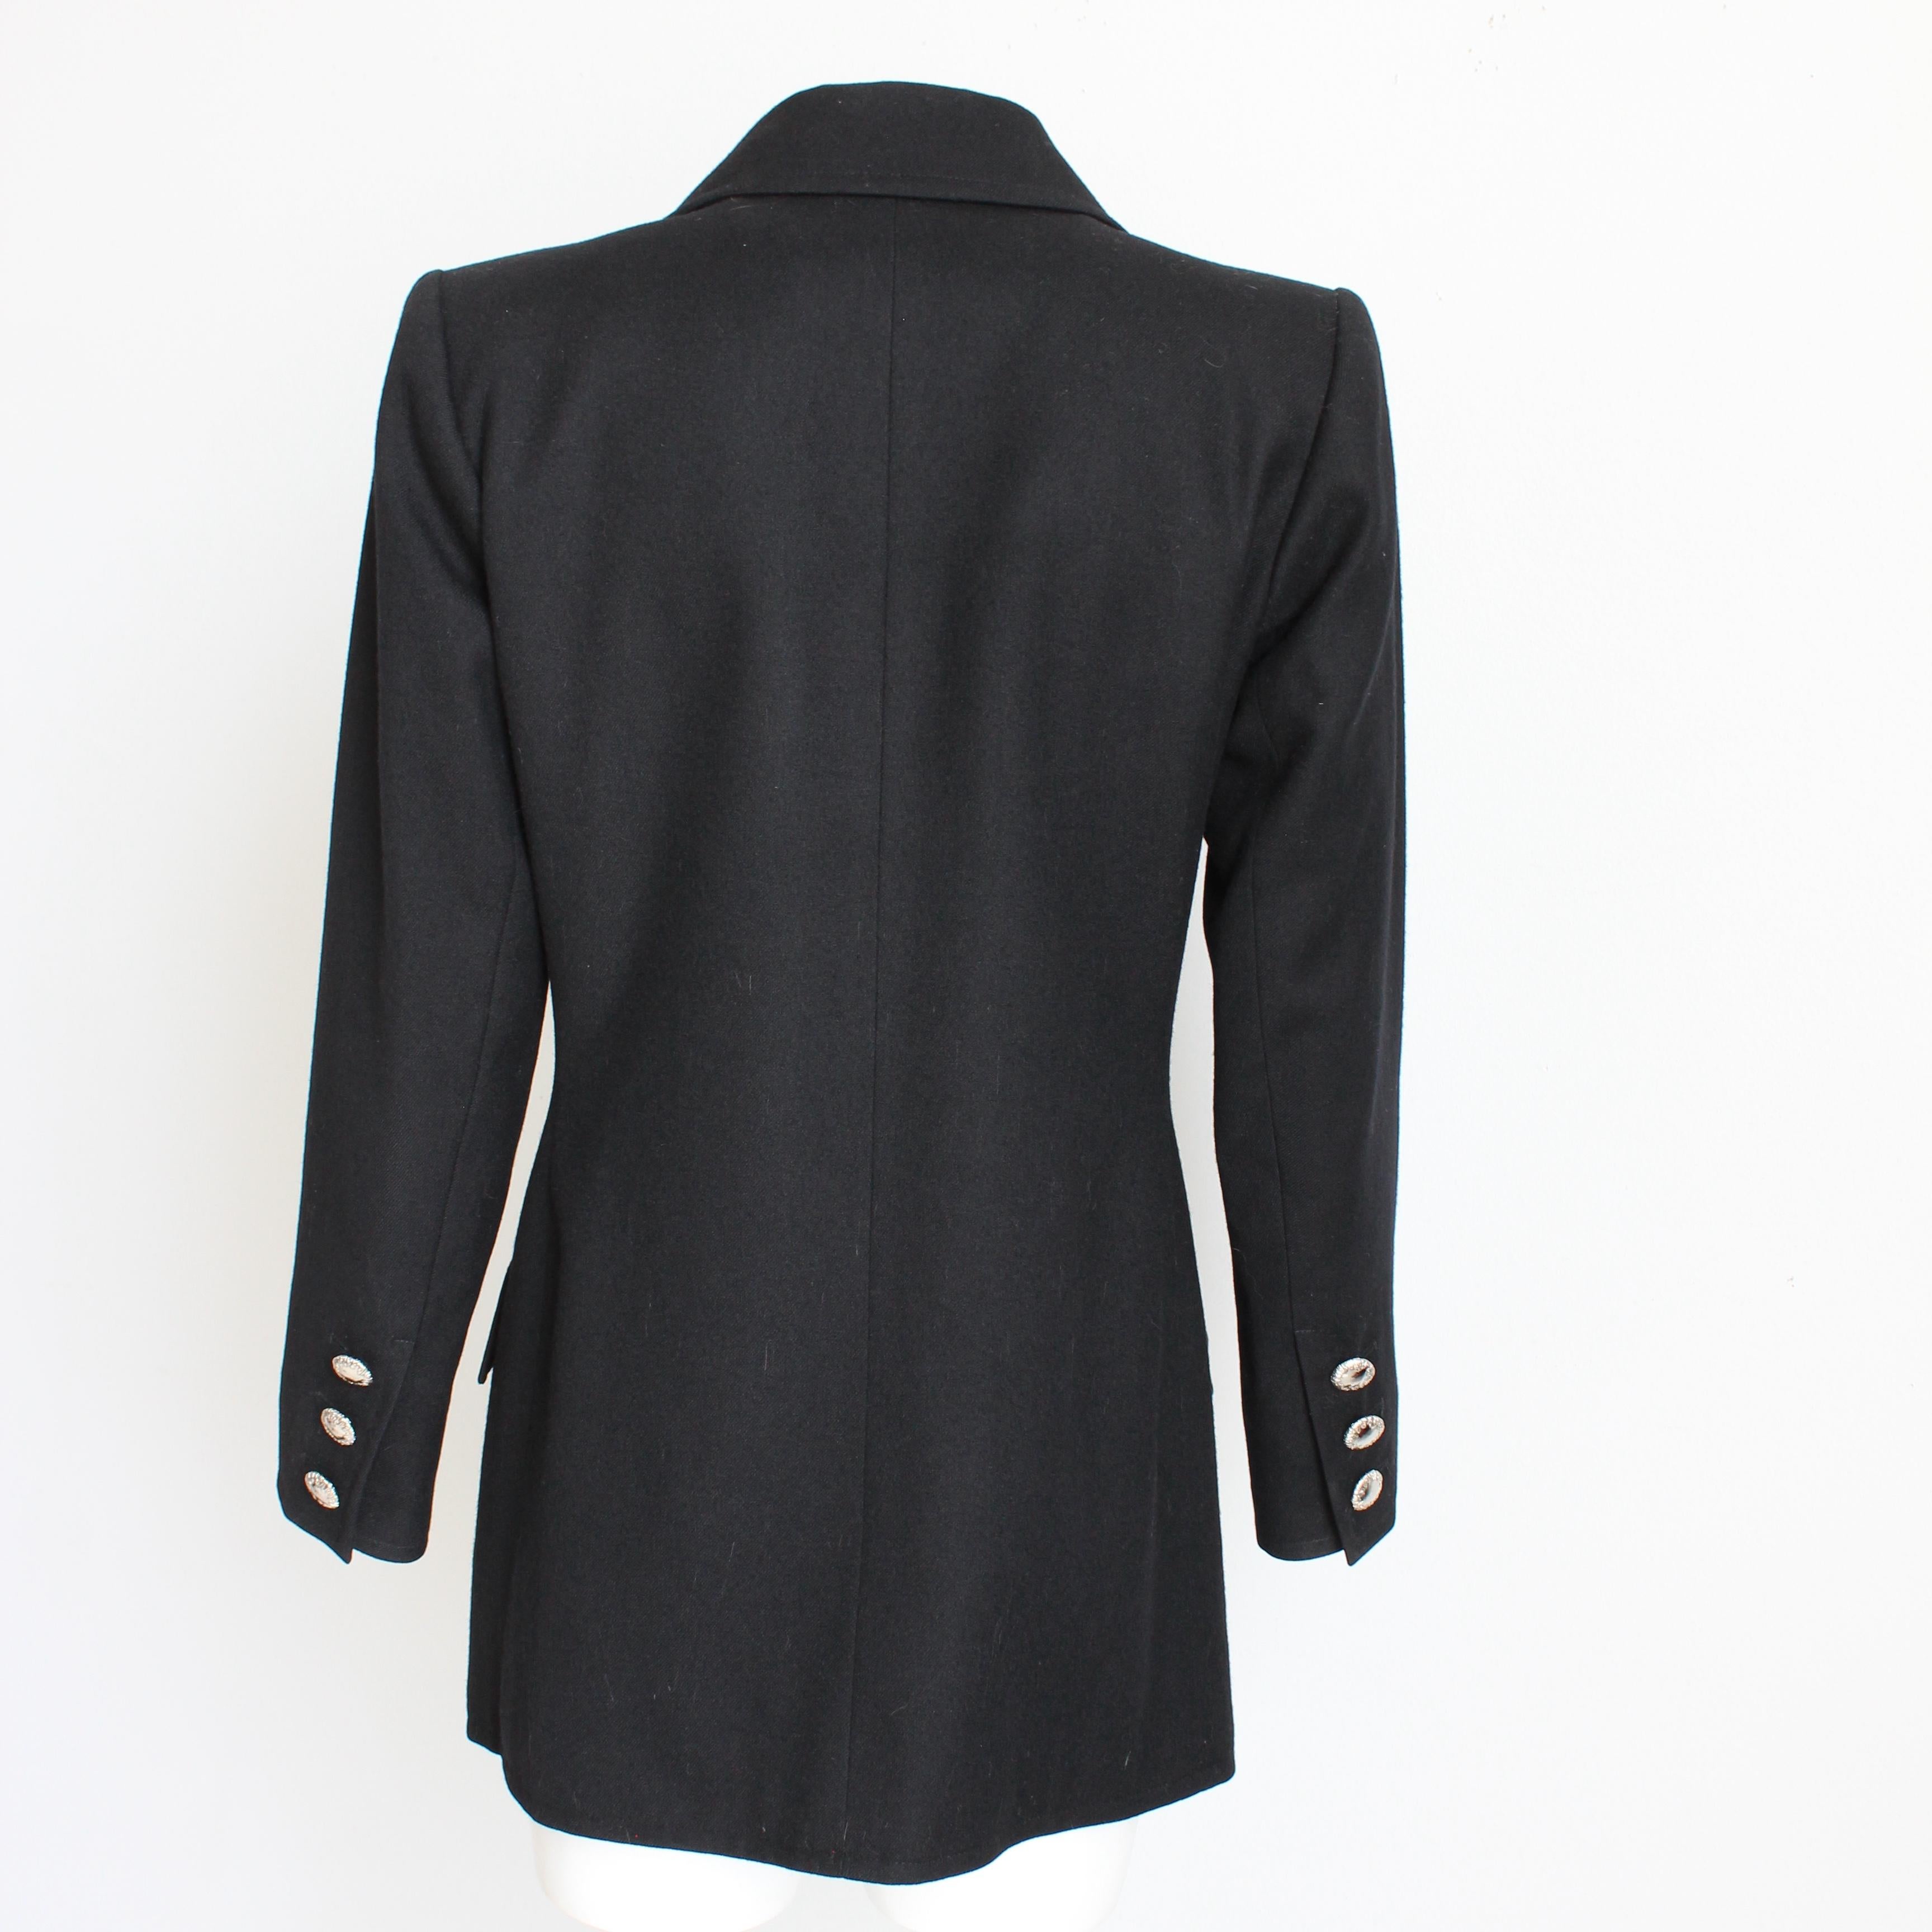 Yves Saint Laurent Jacket Black Wool Double Breasted Pea Coat Style Vintage 90s For Sale 1